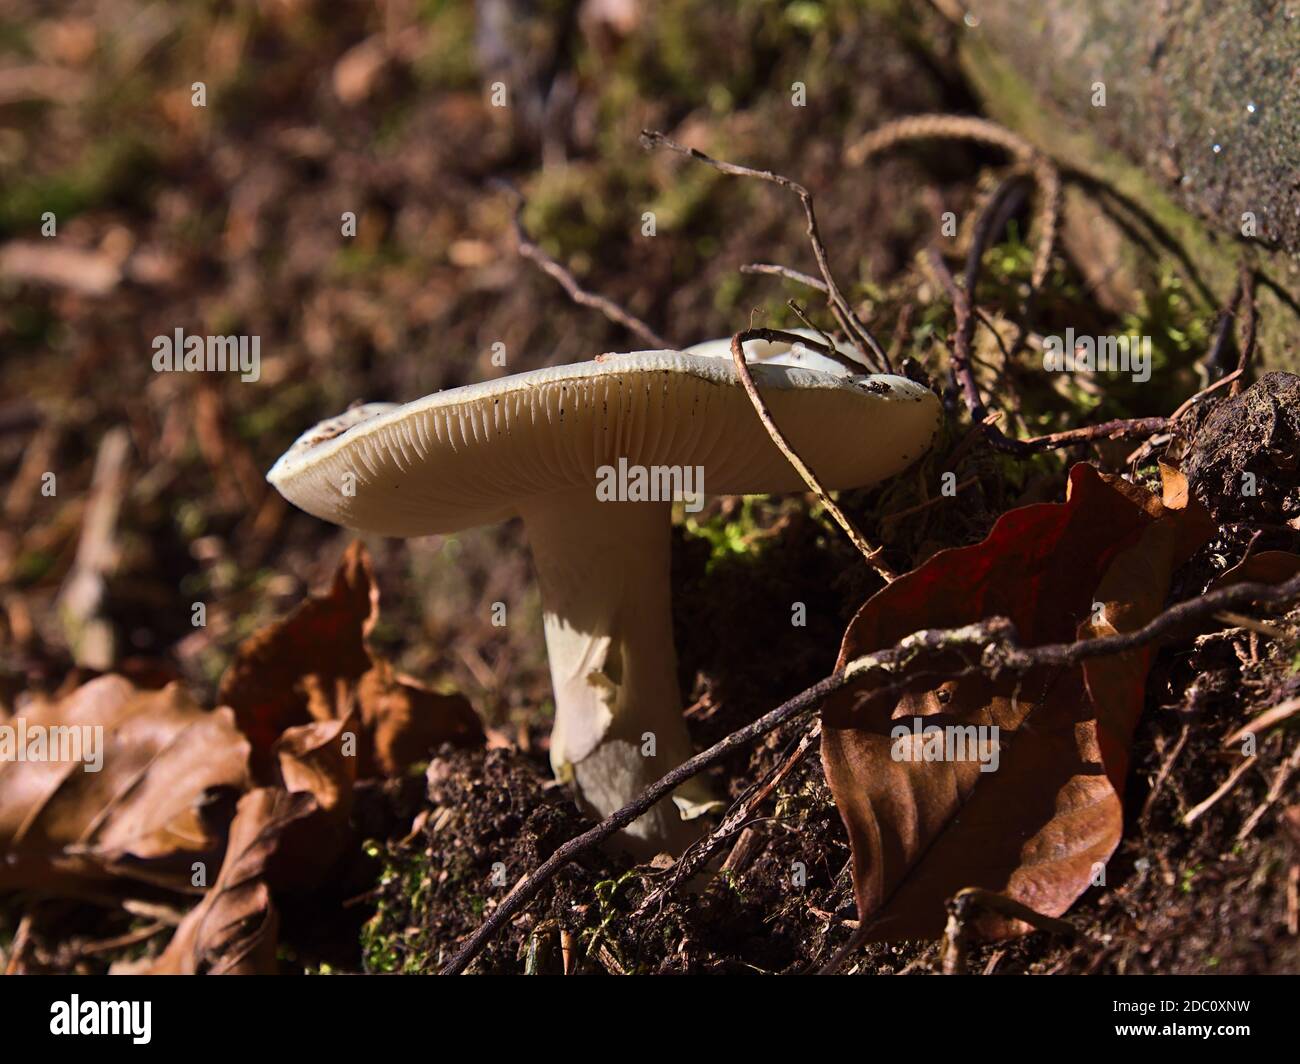 Macro photography of single white colored mushroom growing at the side of a hiking path in Black Forest, Germany in autumn season with visible grill. Stock Photo